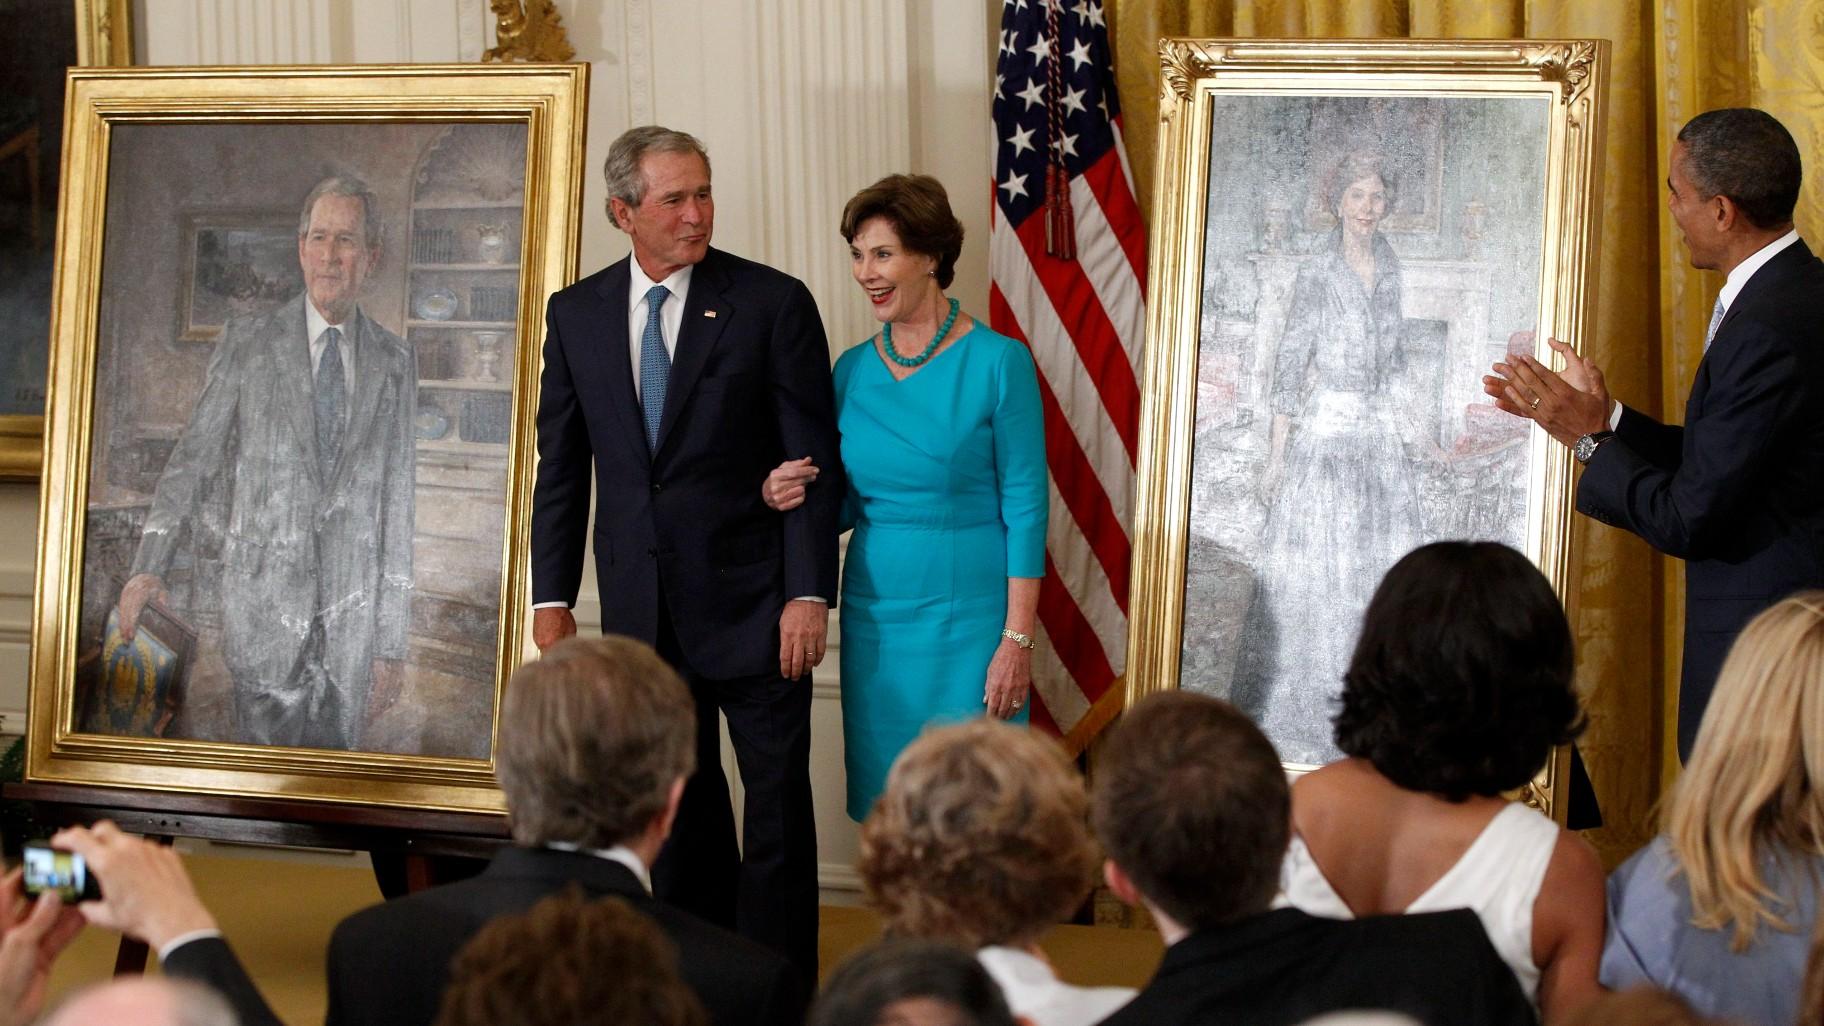 President Barack Obama applauds former President George W. Bush and former first lady Laura Bush during a ceremony in the East Room of the White House in Washington, May 31, 2012, where the Bush’s portraits were unveiled. (AP Photo / Charles Dharapak, File)